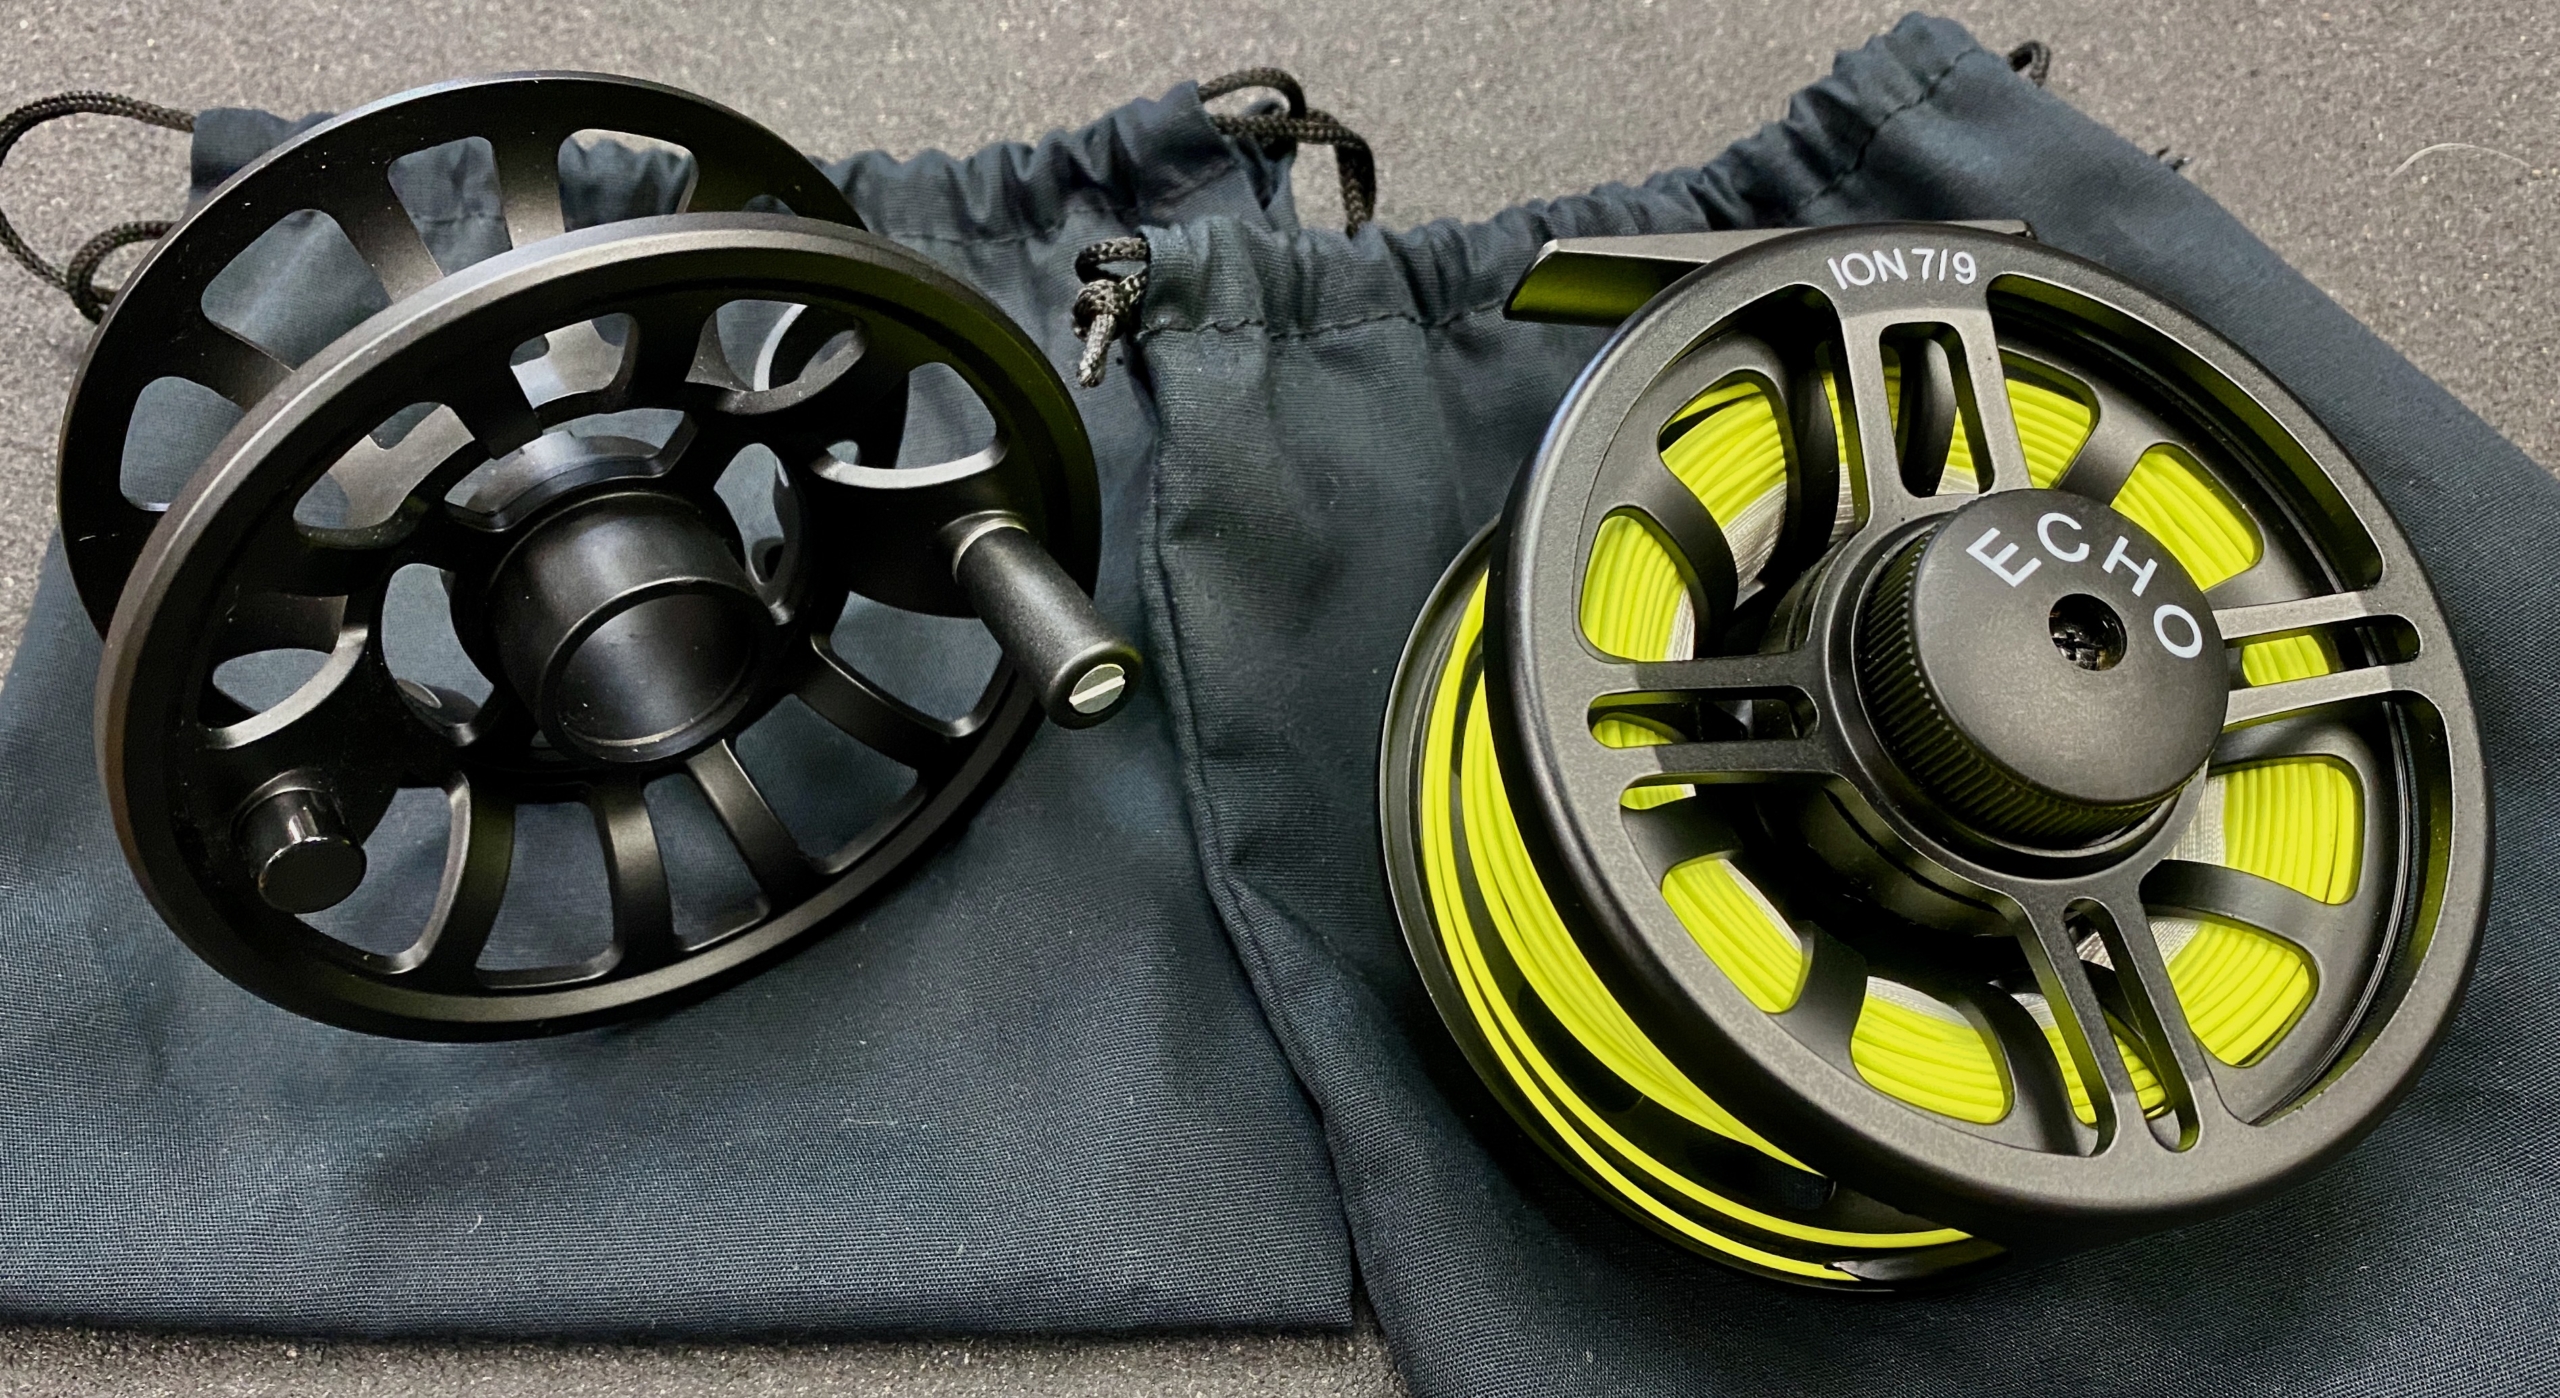 SOLD! – Echo Ion 7/9 Fly Reel & Spare Spool – NEVER USED! – $100